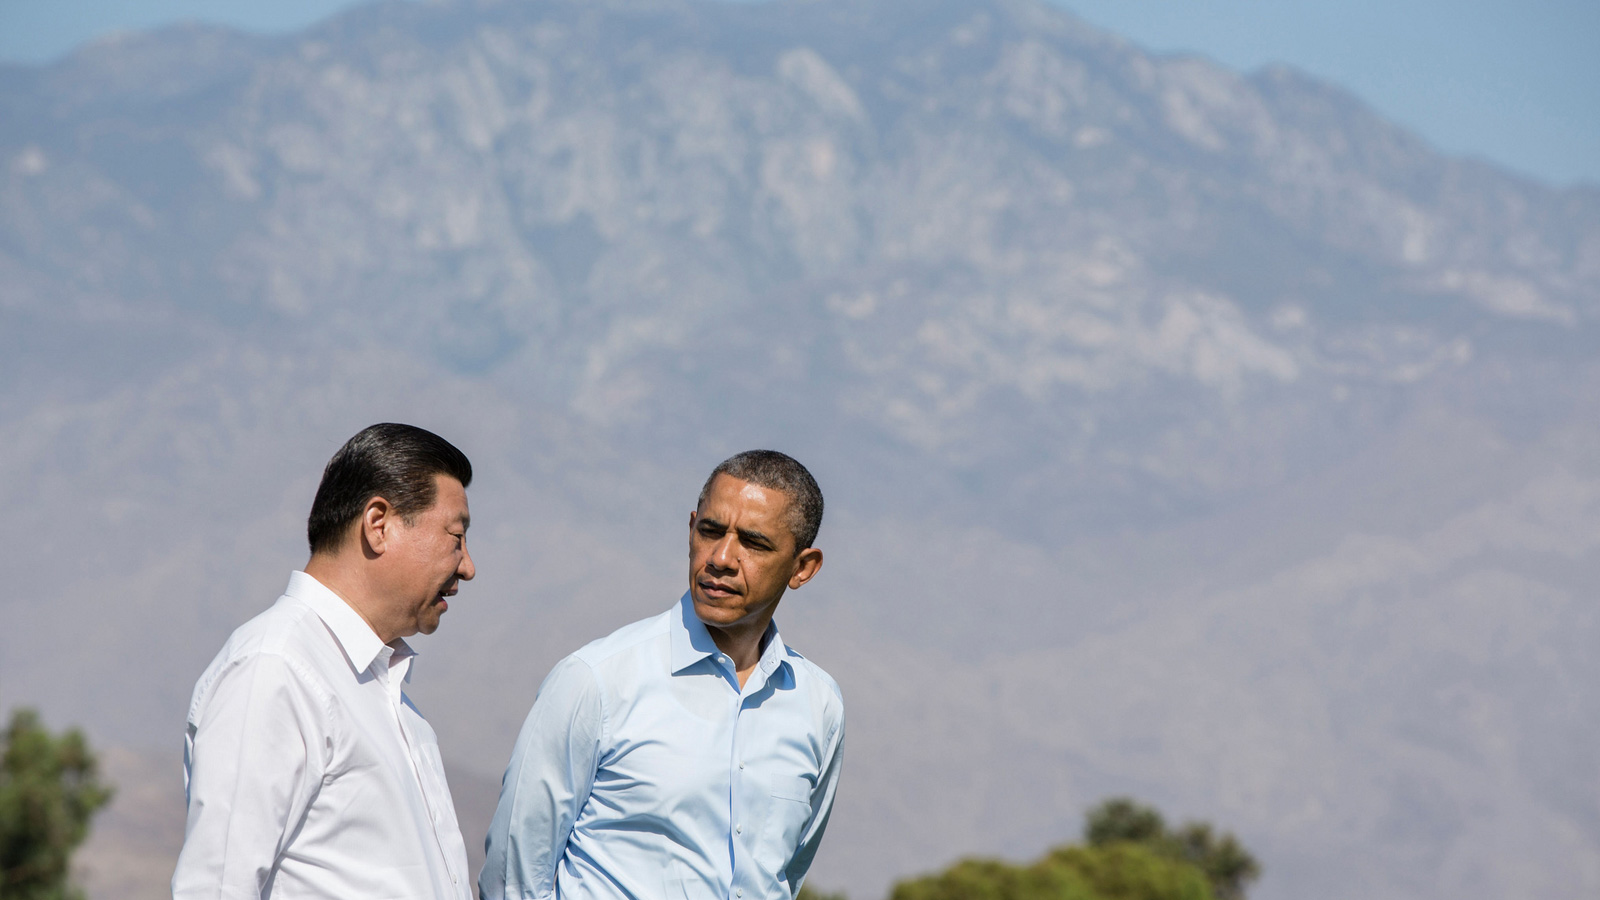 President Barack Obama and President Xi Jinping of the People's Republic of China walk on the grounds of the Annenberg Retreat at Sunnylands in Rancho Mirage, Calif.